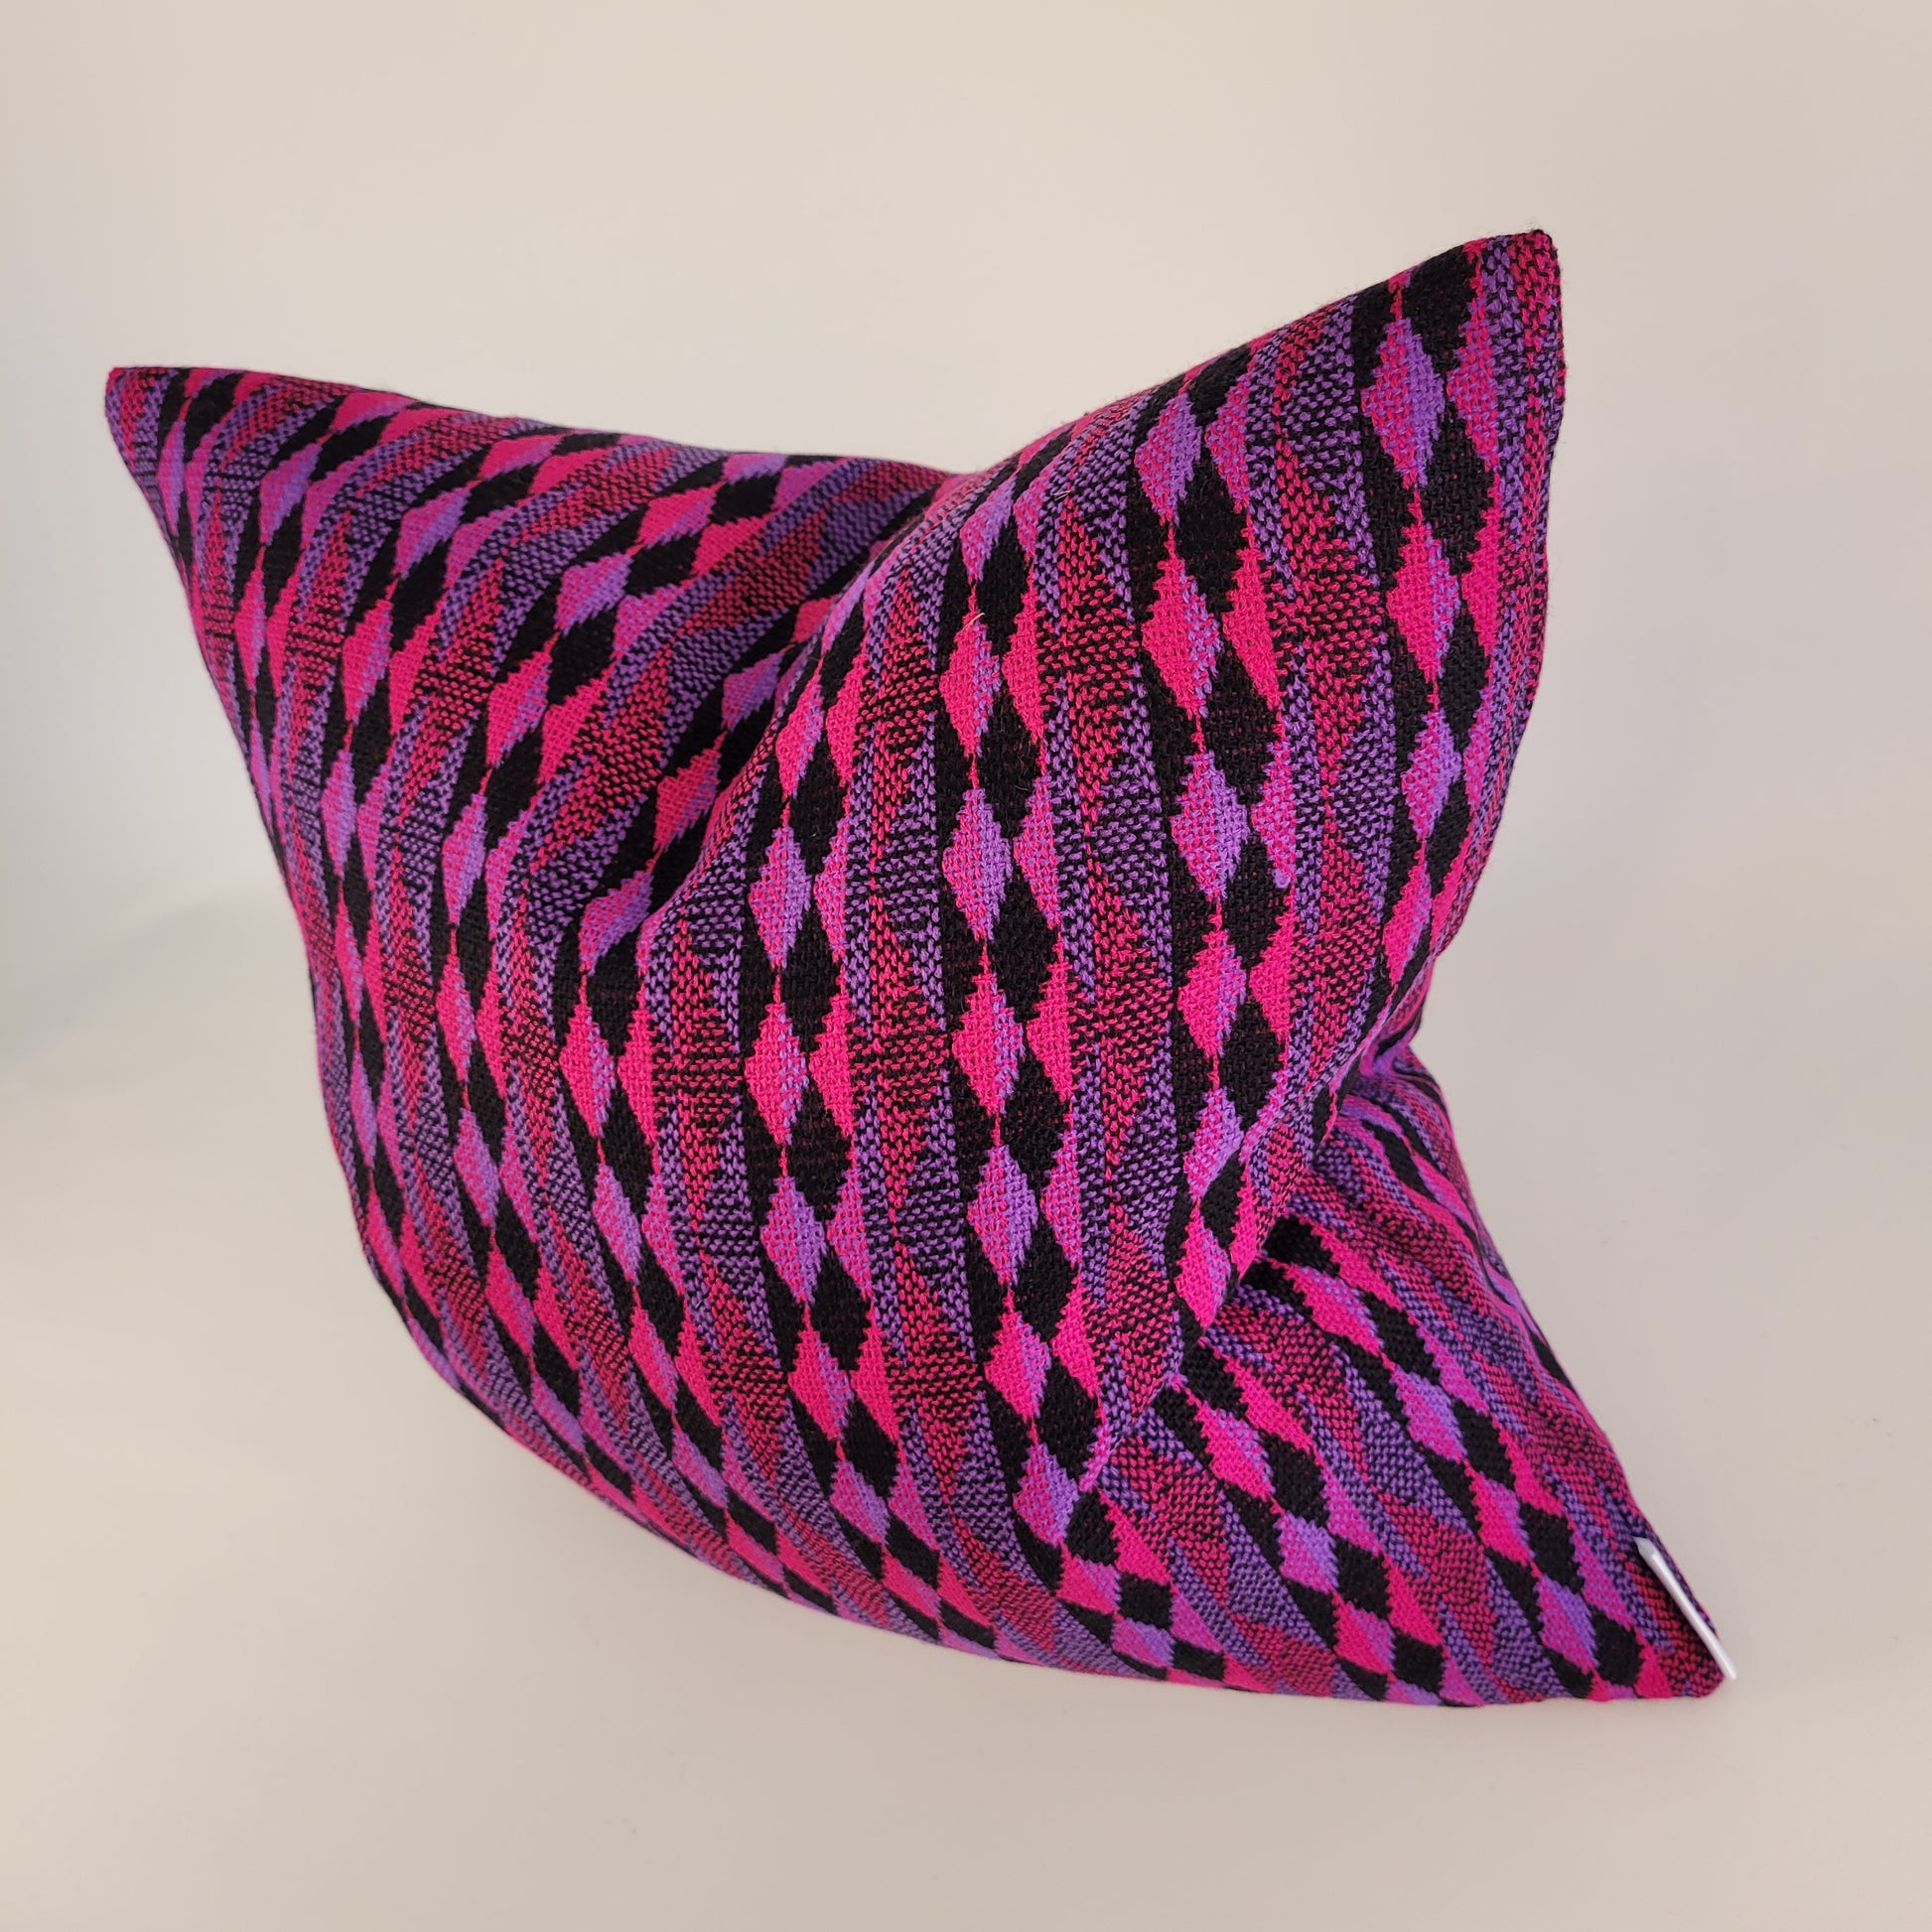 Vintage 1960s Hot Pink, Purple and Black Geometric Pillow 18"